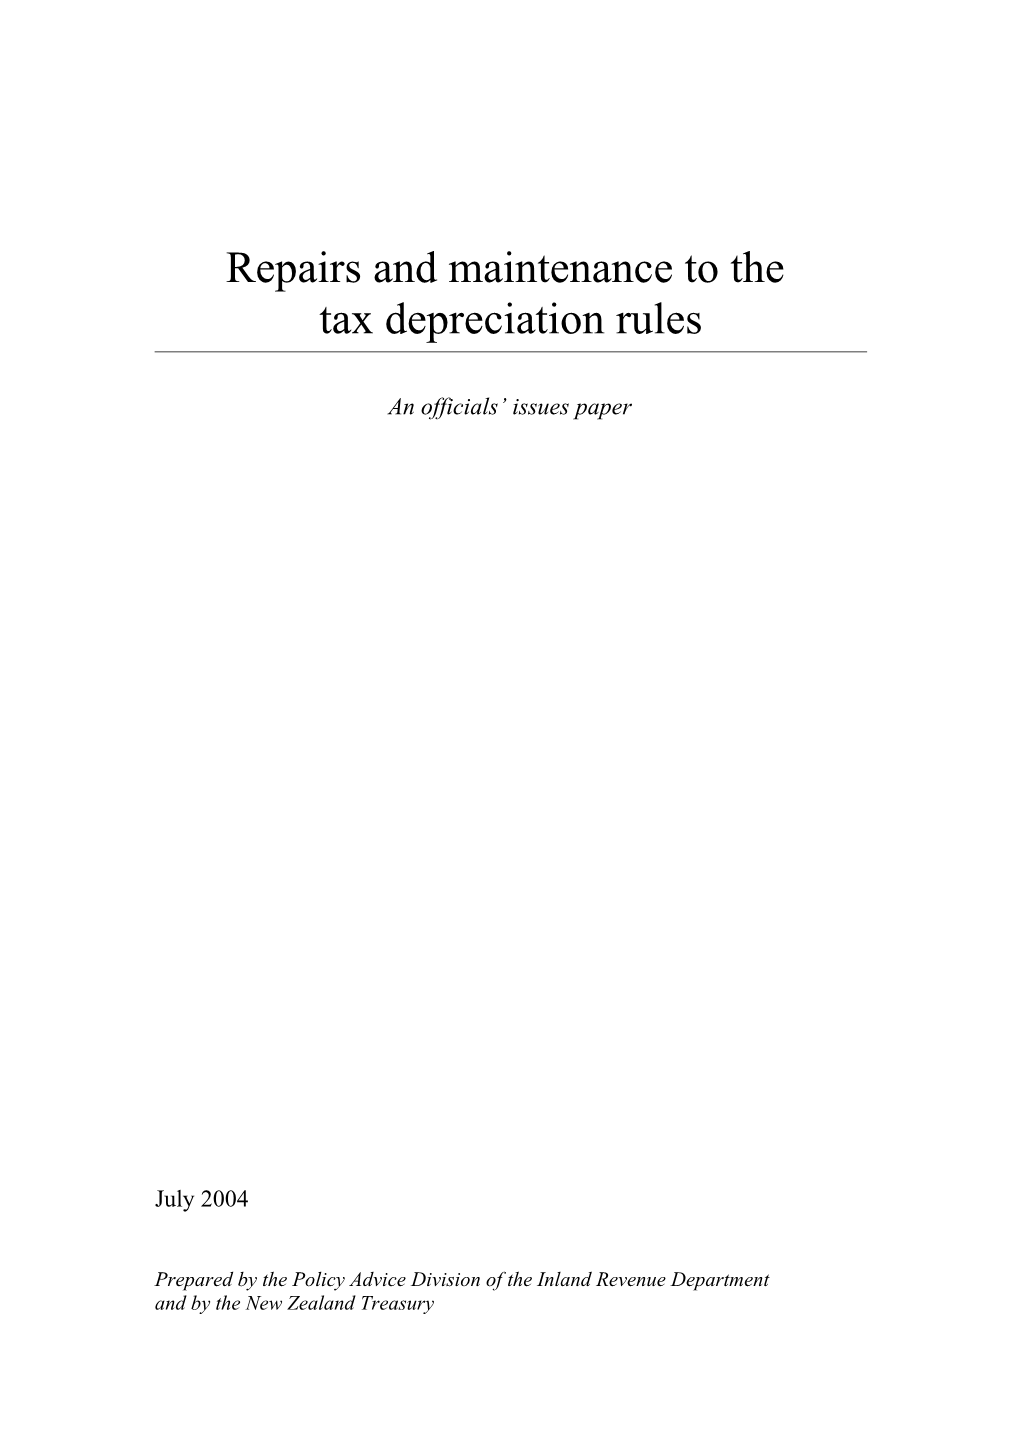 Repairs And Maintenance To The Tax Depreciation Rules - An Officials' Issues Paper